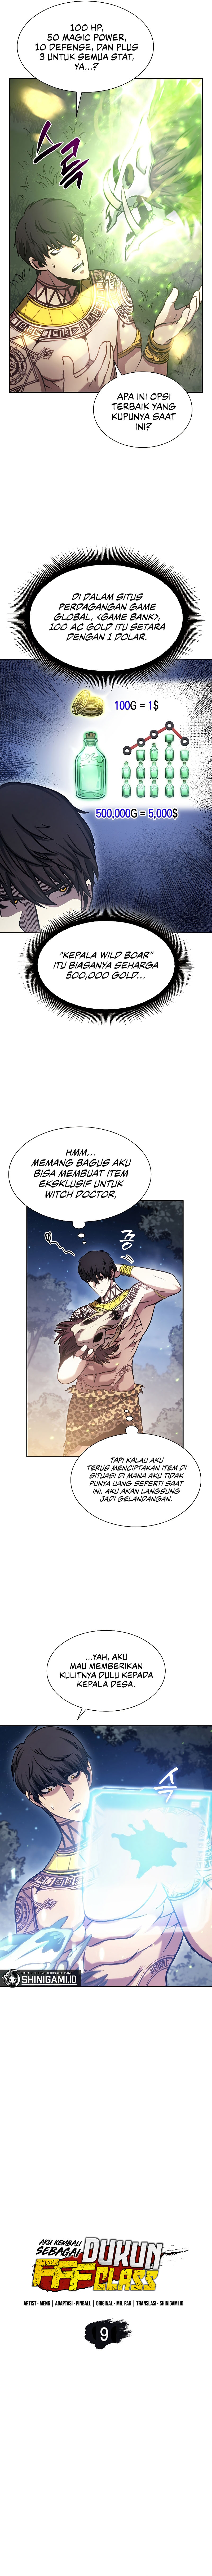 i-returned-as-an-fff-class-witch-doctor Chapter 9